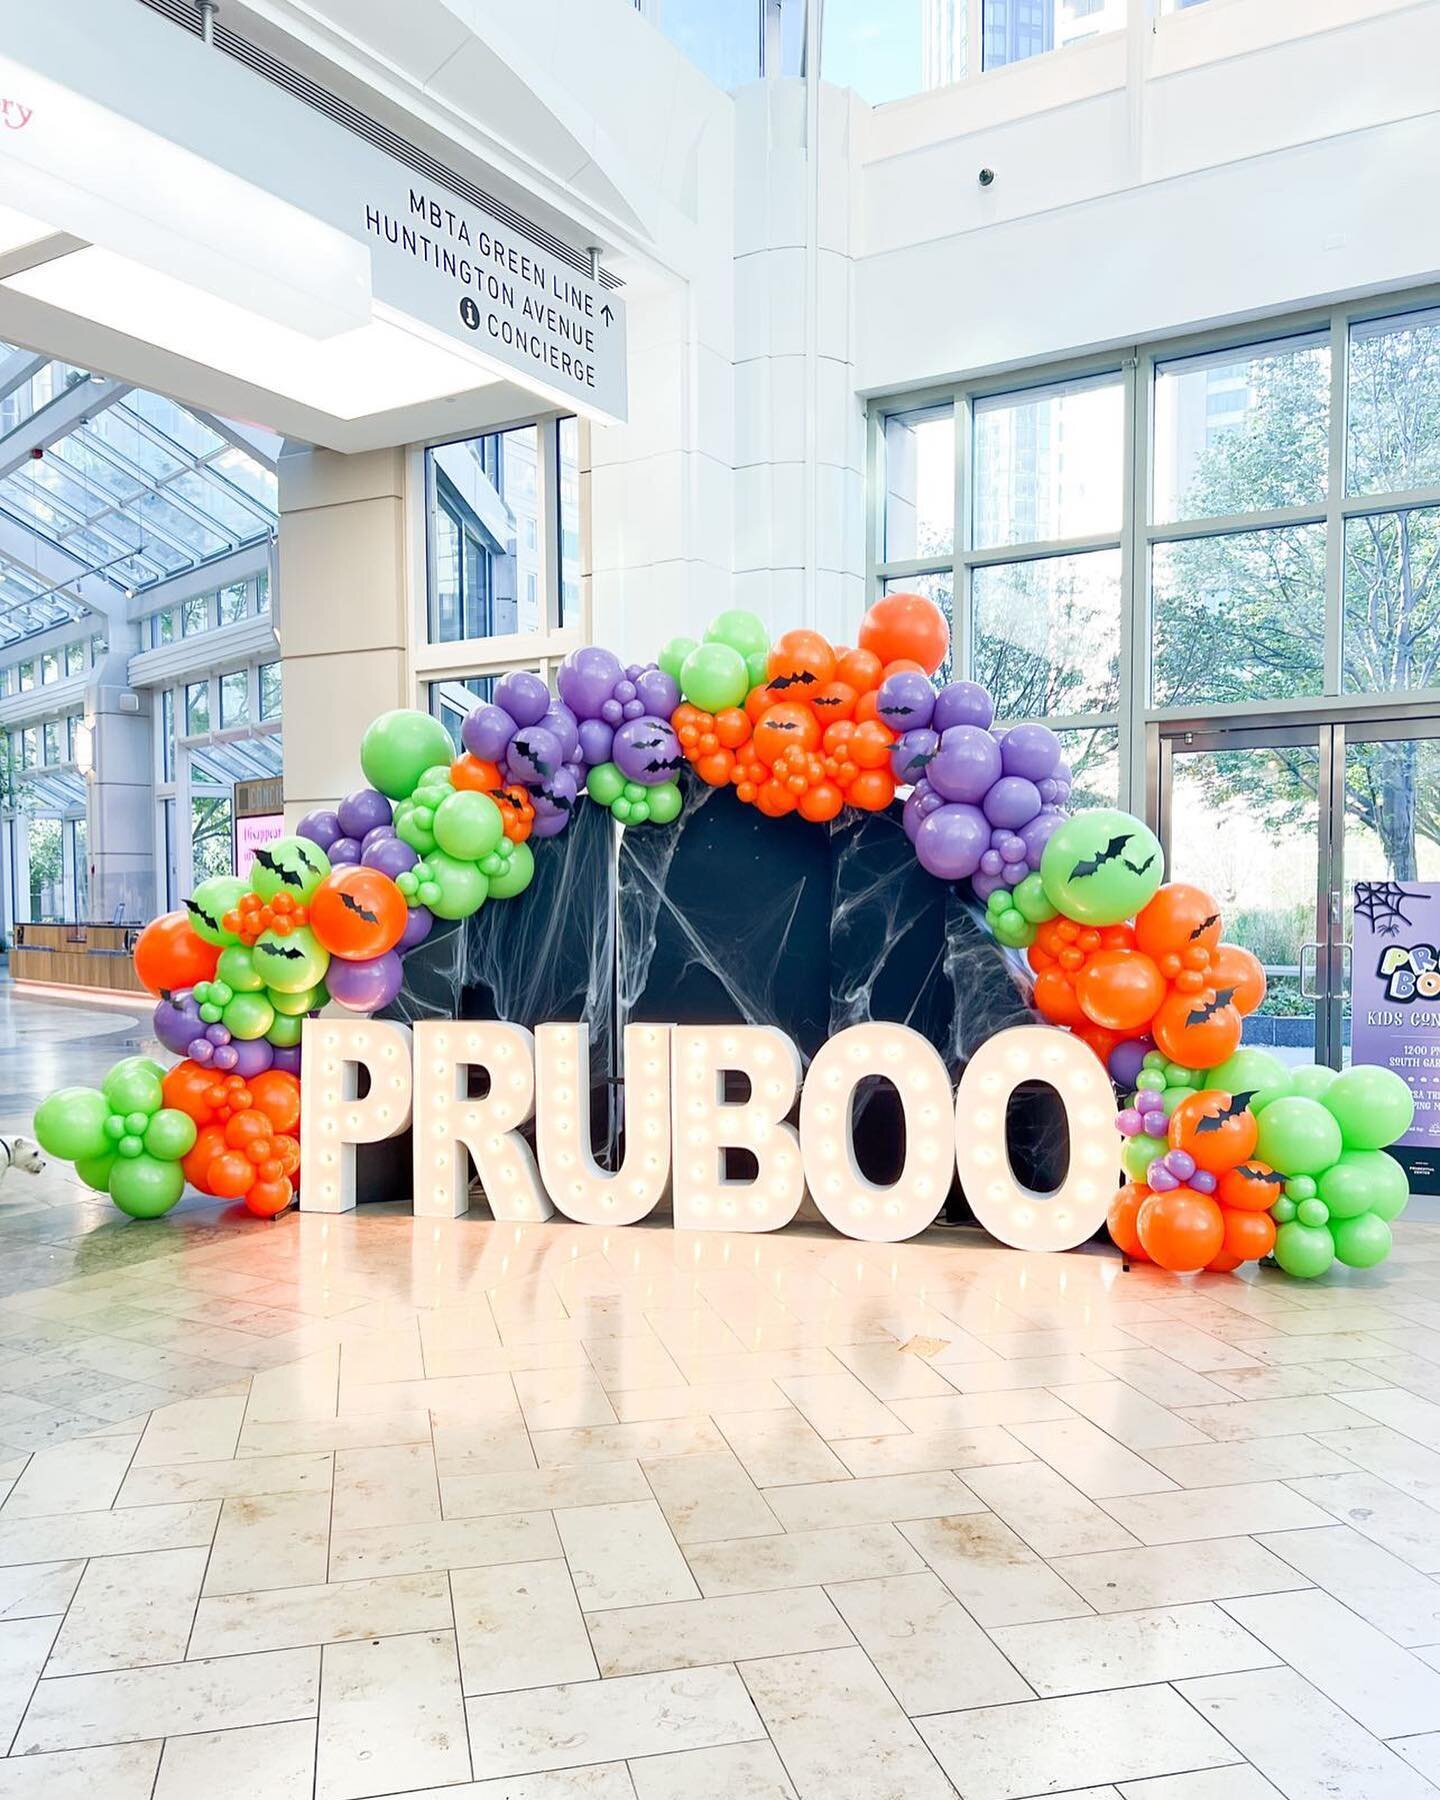 Happy Halloween from the Prudential Center. BOO! 👻🎃💀 A super fun way to end a 13-backdrop weekend. 😅 Have fun out there today!

@polishedballoons 
@pruboston 
@alphalitboston_